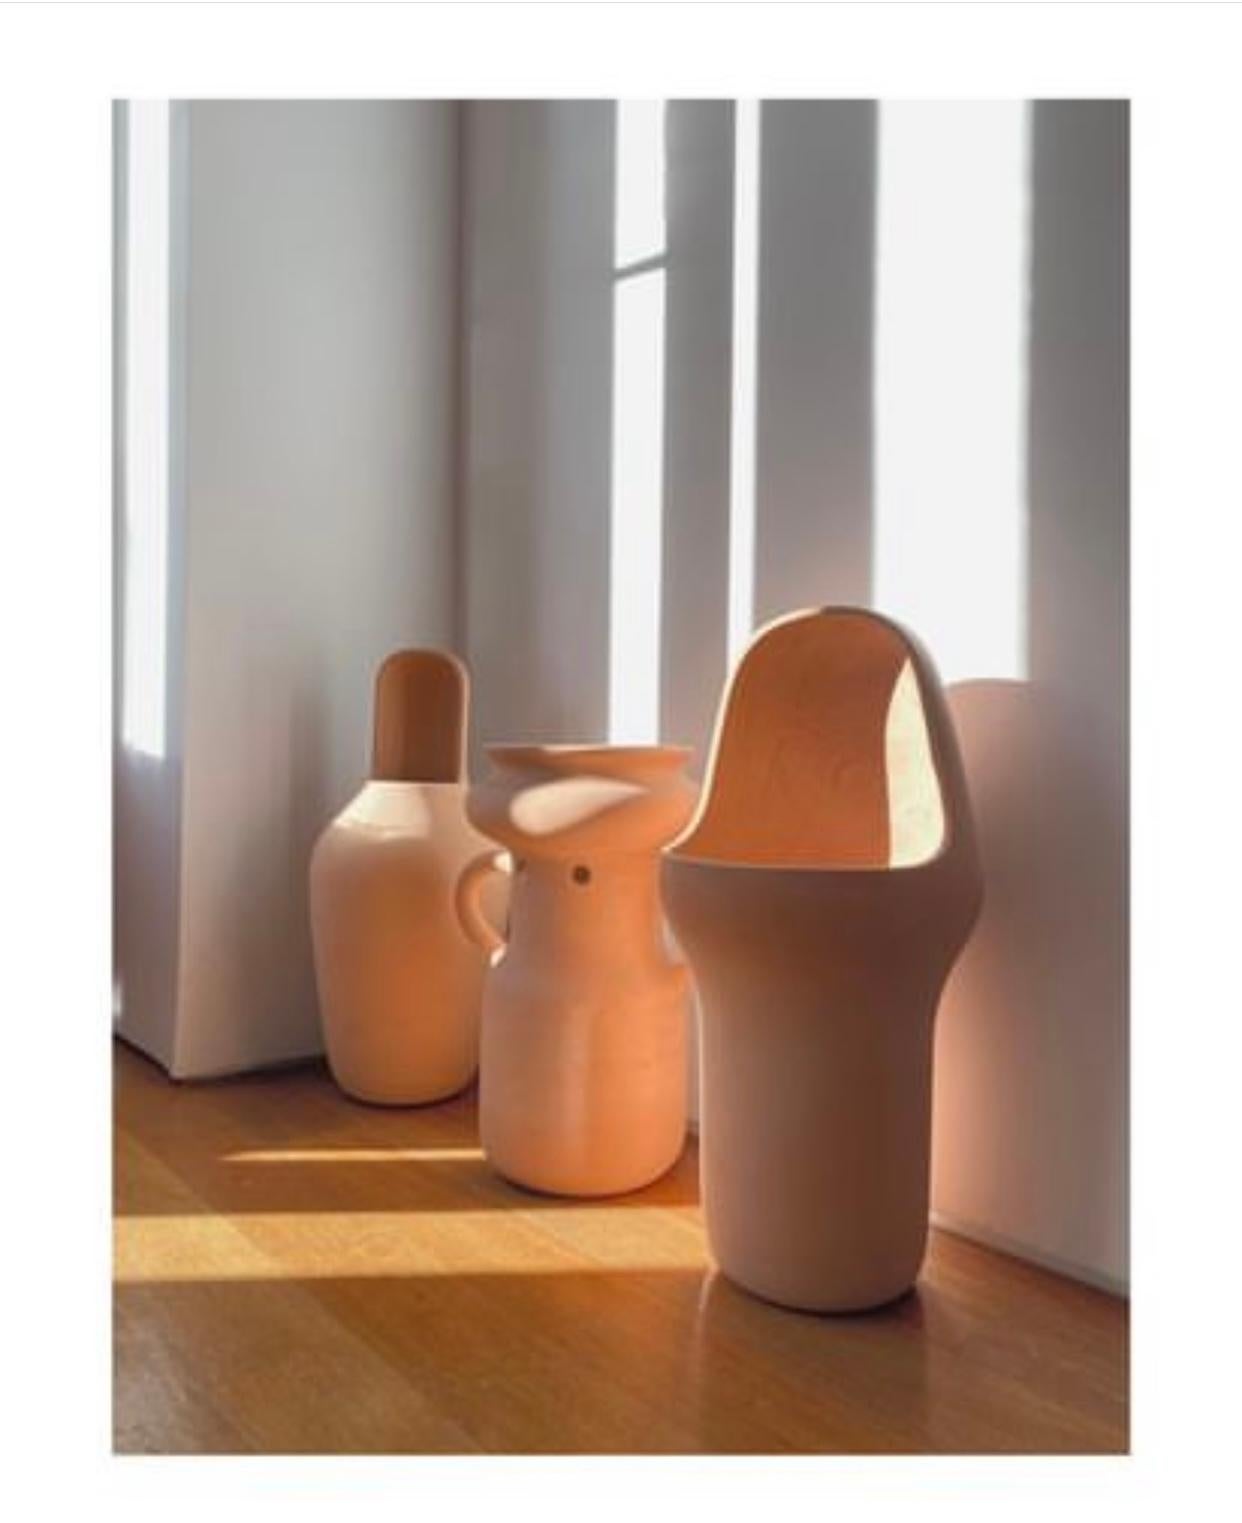 Set of 3 Outdoor Terracotta Vases from the series 